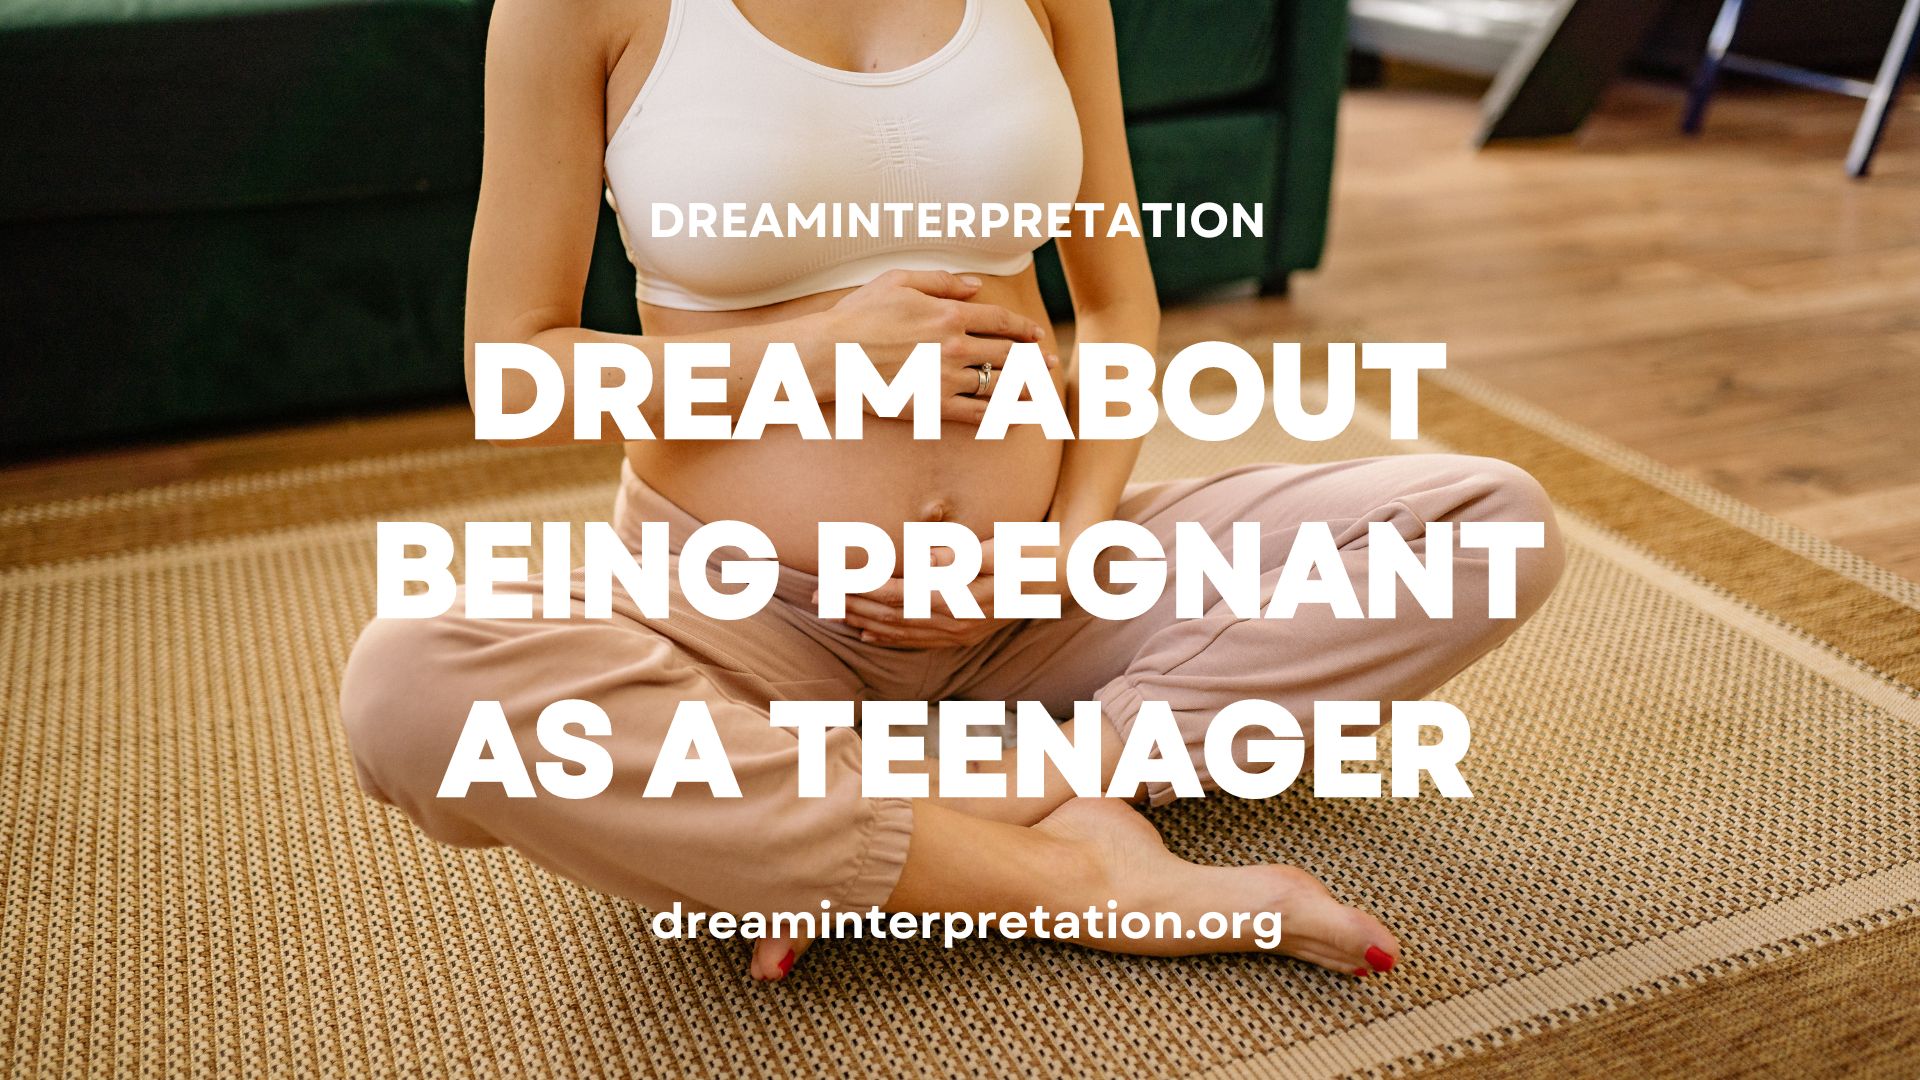 Dream About Being Pregnant As a Teenager